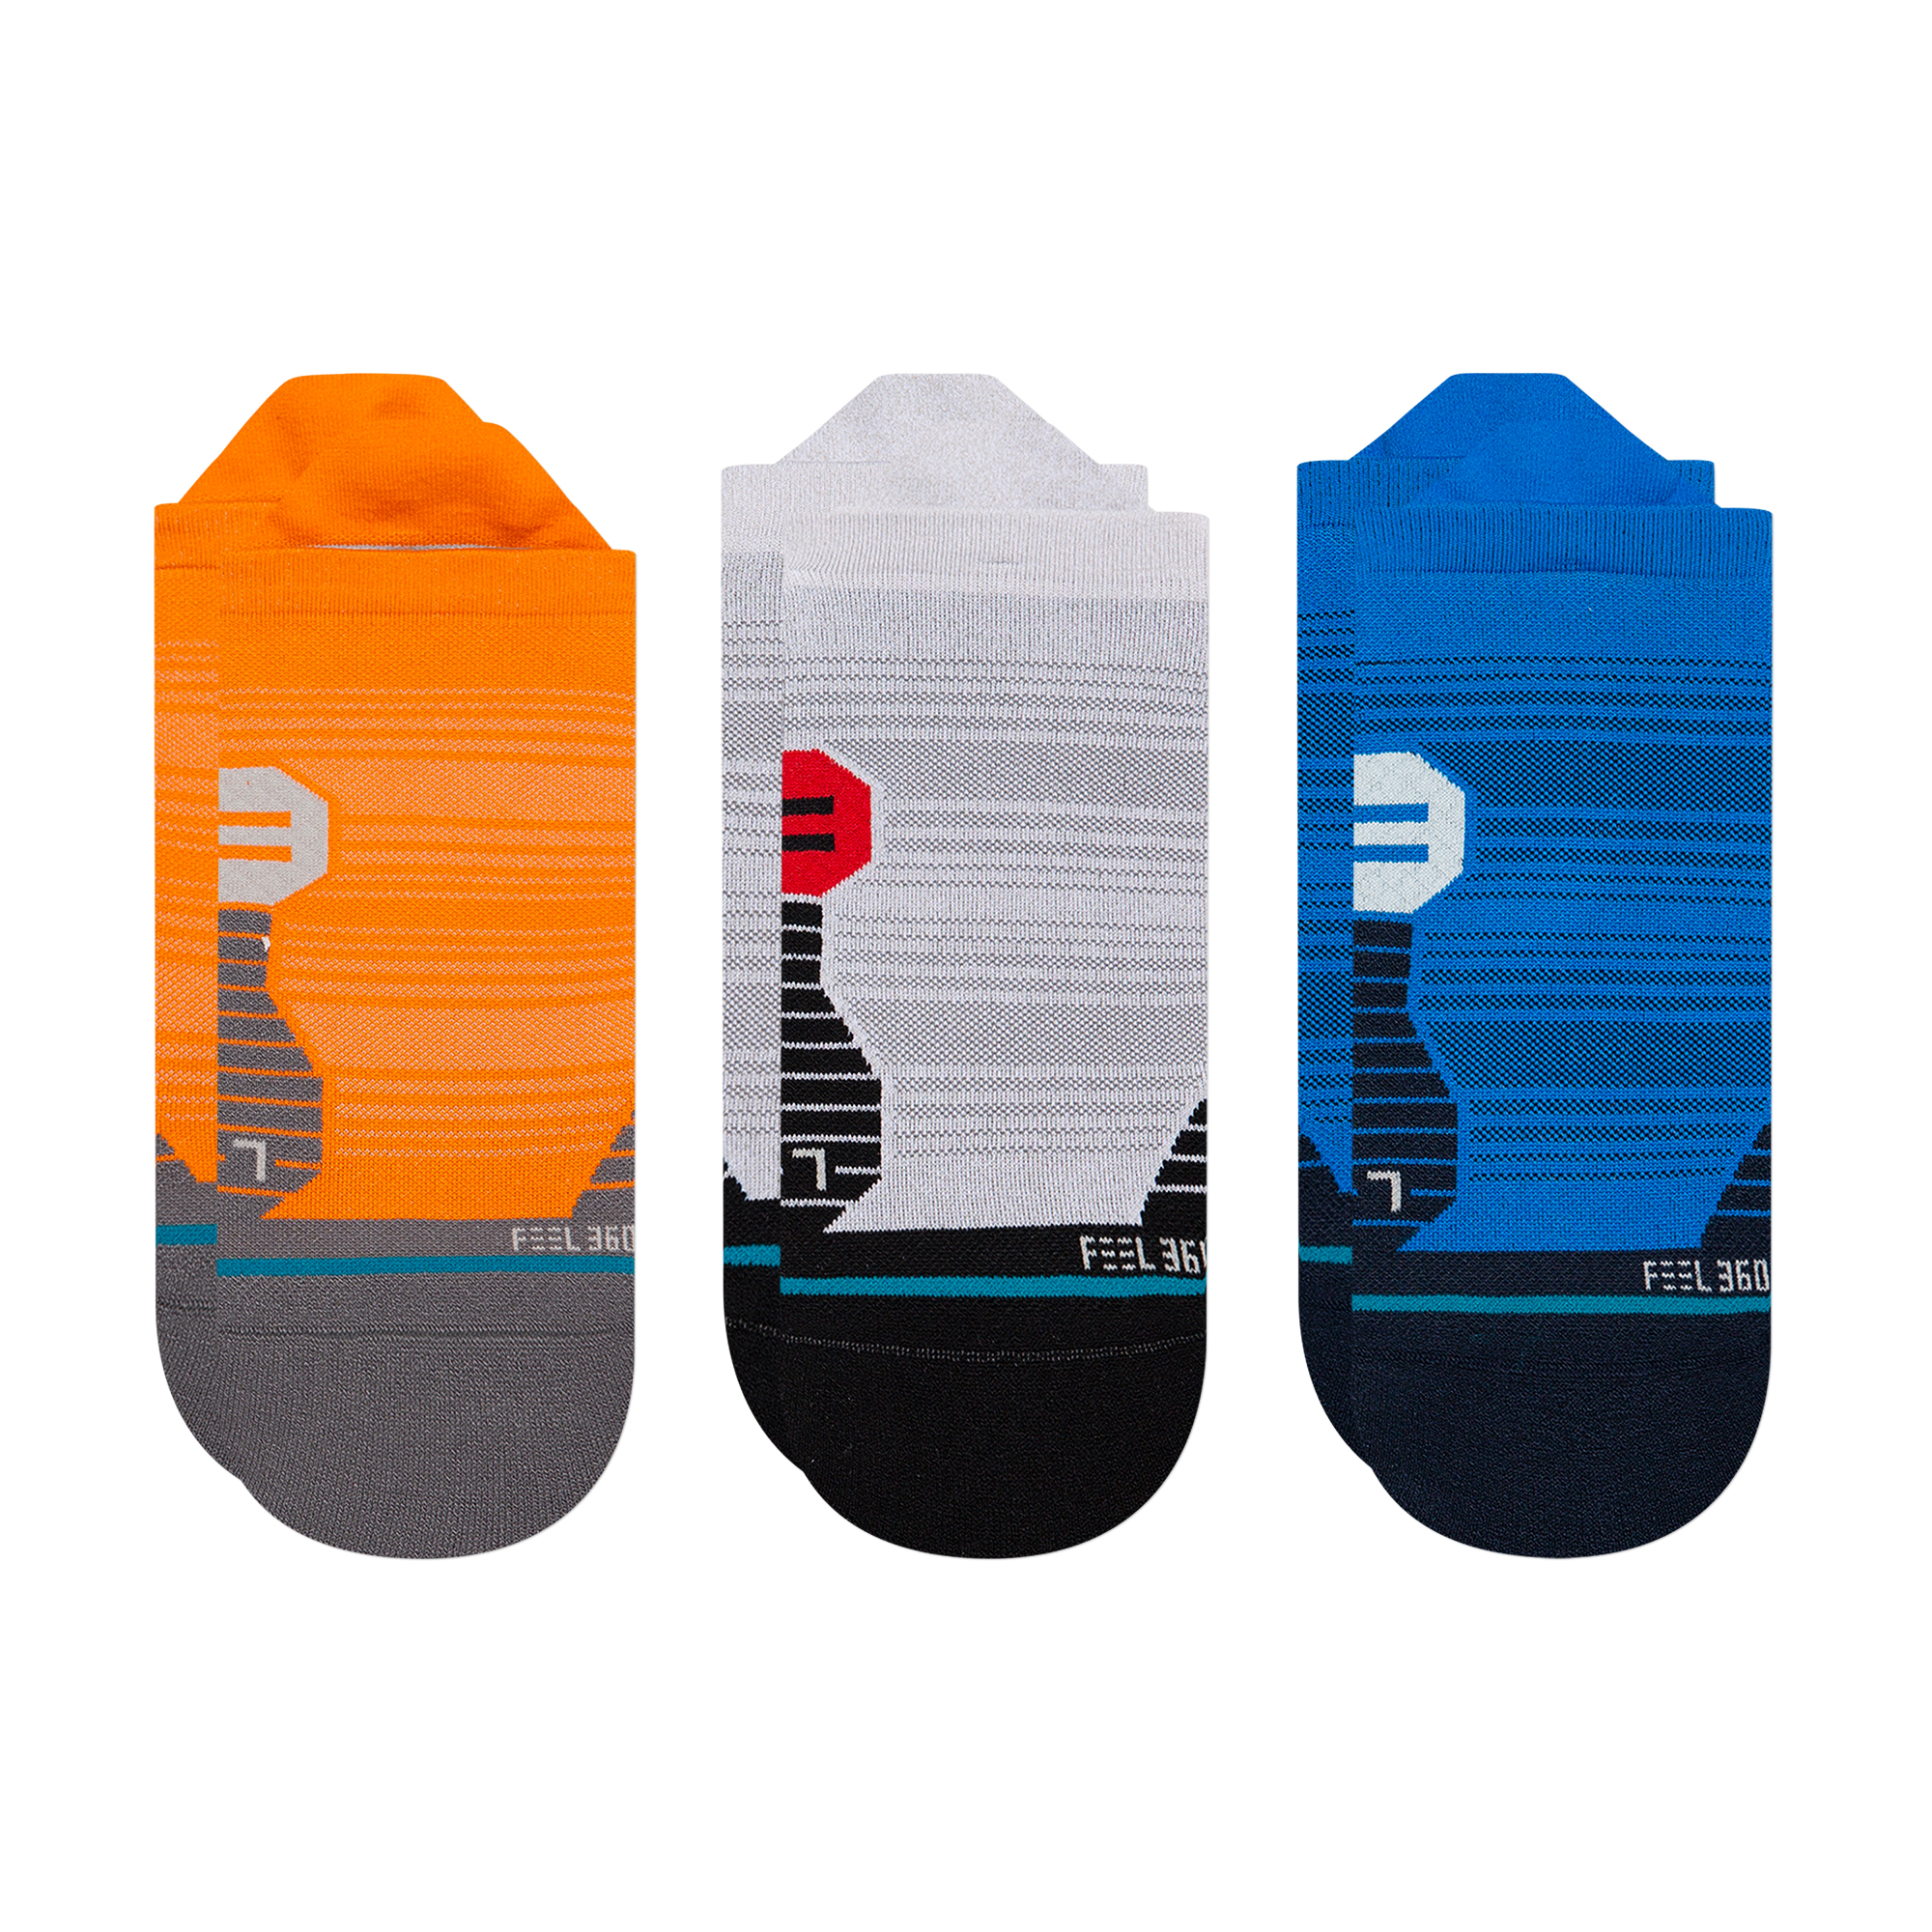 Bombas. Socks, Underwear, T-Shirts, Slippers designed for comfort, quality,  and impact